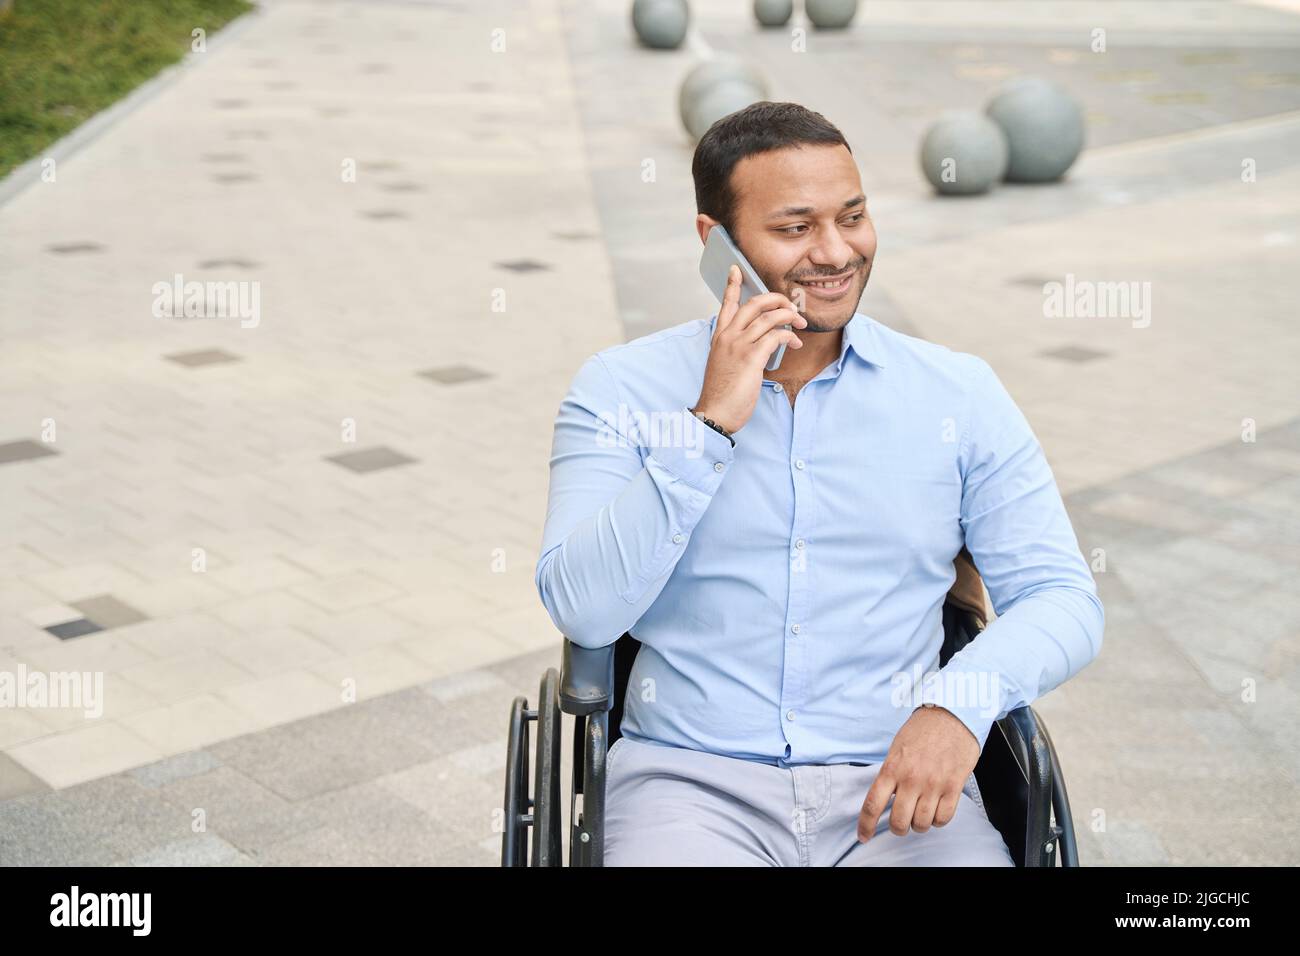 Man with disability smiling during phone call Stock Photo